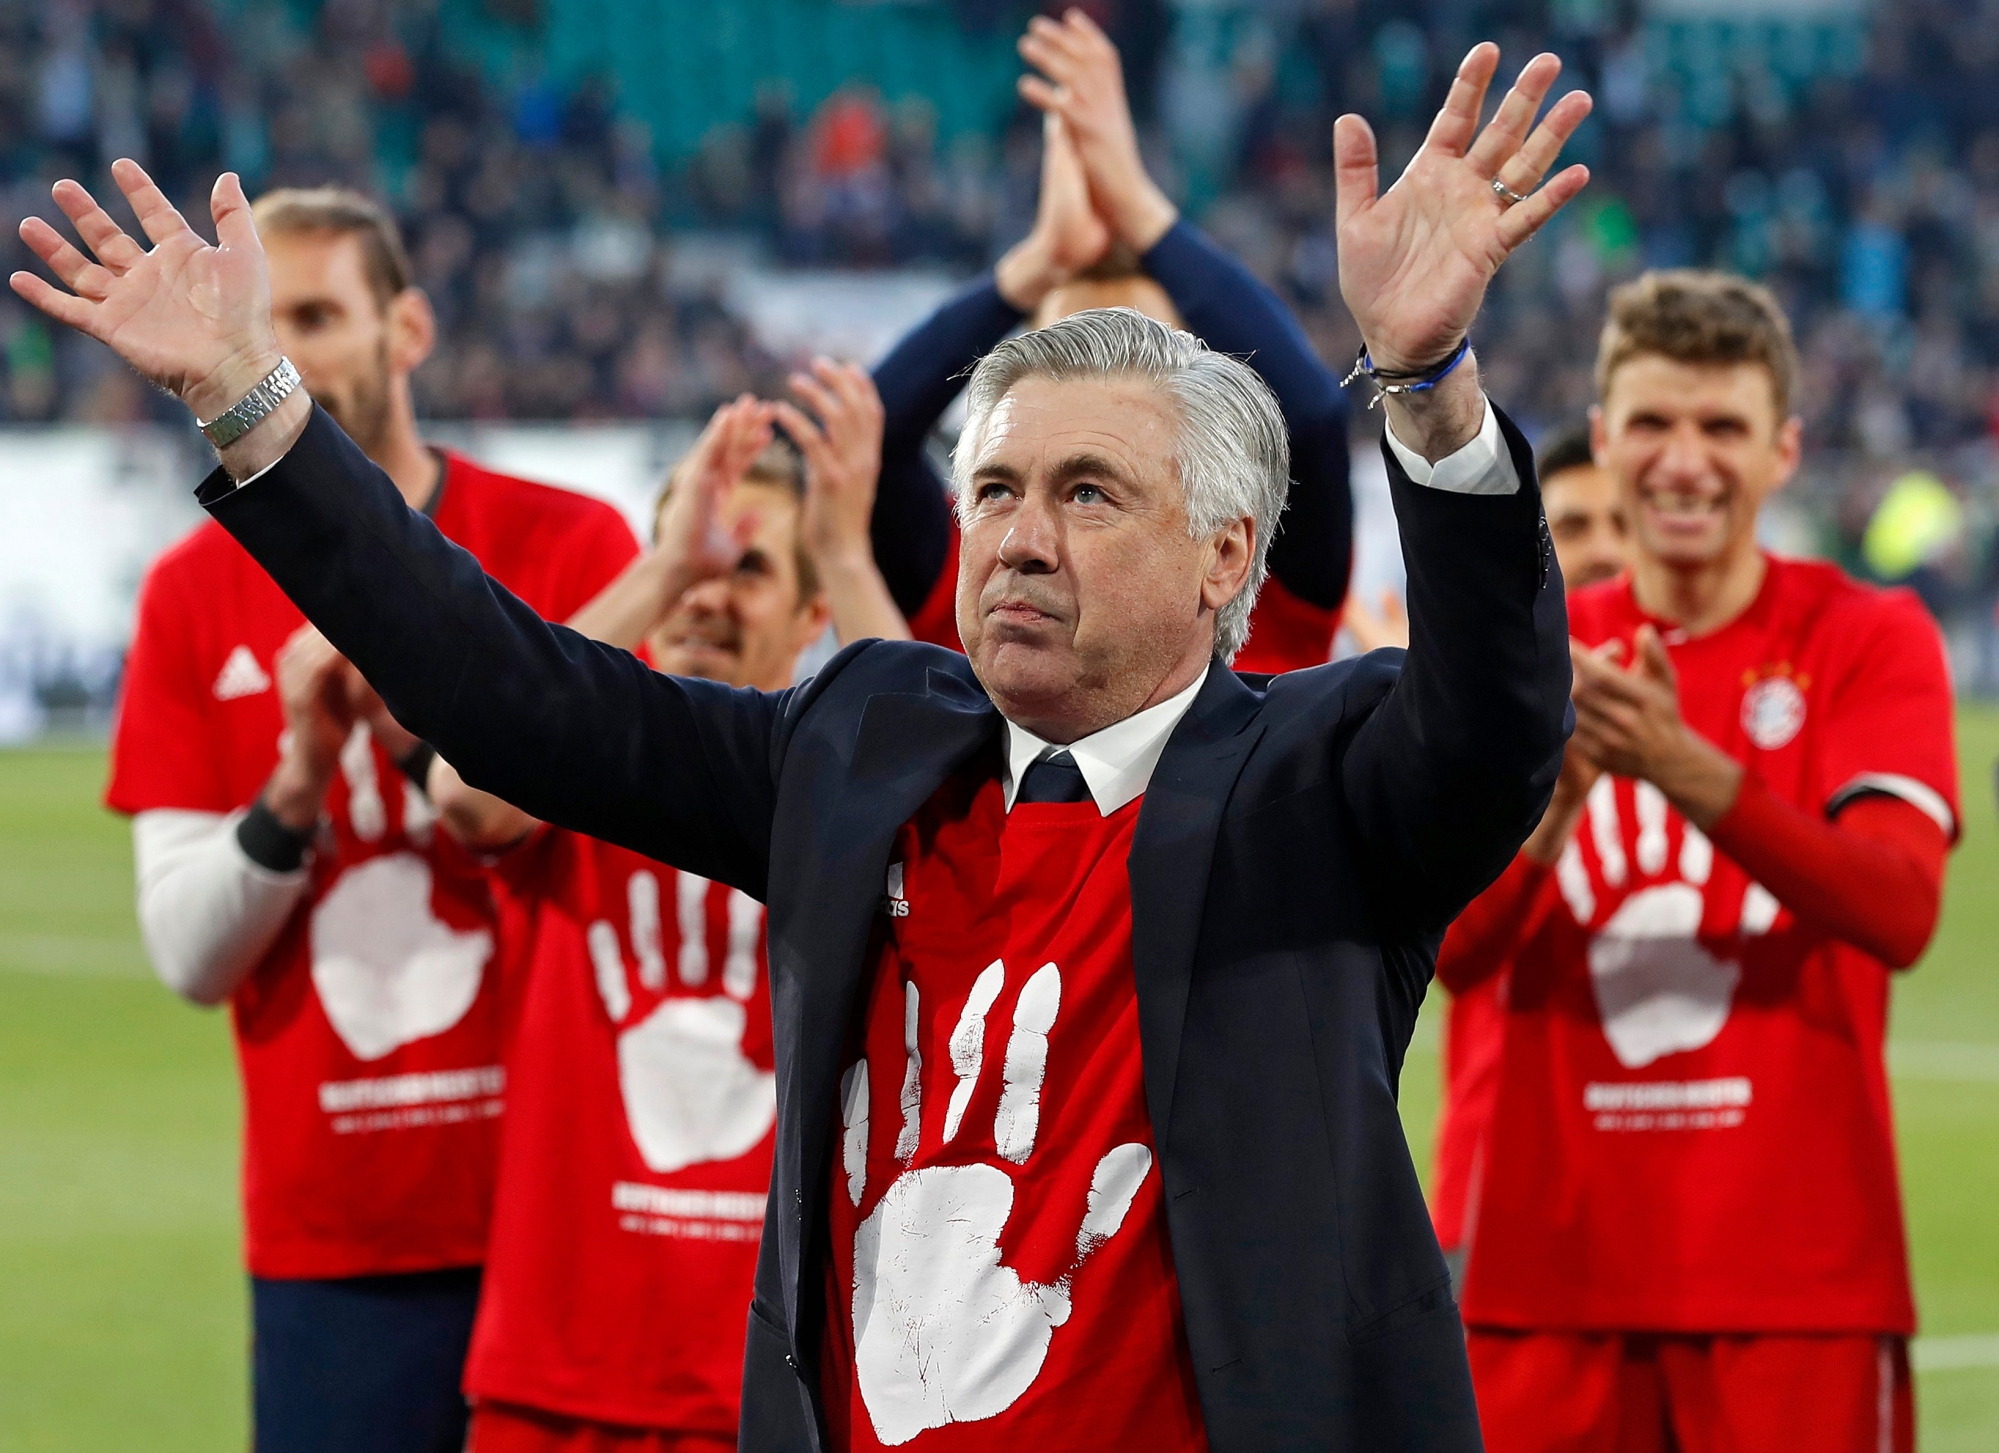 epaselect epa05935914 Munich's head coach Carlo Ancelotti (C)  celebrates with his players after winning the German Bundesliga soccer match between VfL Wolfsburg and Bayern Munich in Wolfsburg, Germany, 29 April 2017. Bayern won the match with 0-6 to clinch their unprecedented fifth consecutive Bundesliga league title.  EPA/FELIPE TRUEBA (EMBARGO CONDITIONS - ATTENTION: Due to the accreditation guidlines, the DFL only permits the publication and utilisation of up to 15 pictures per match on the internet and in online media during the match.) epaselect GERMANY SOCCER BUNDESLIGA